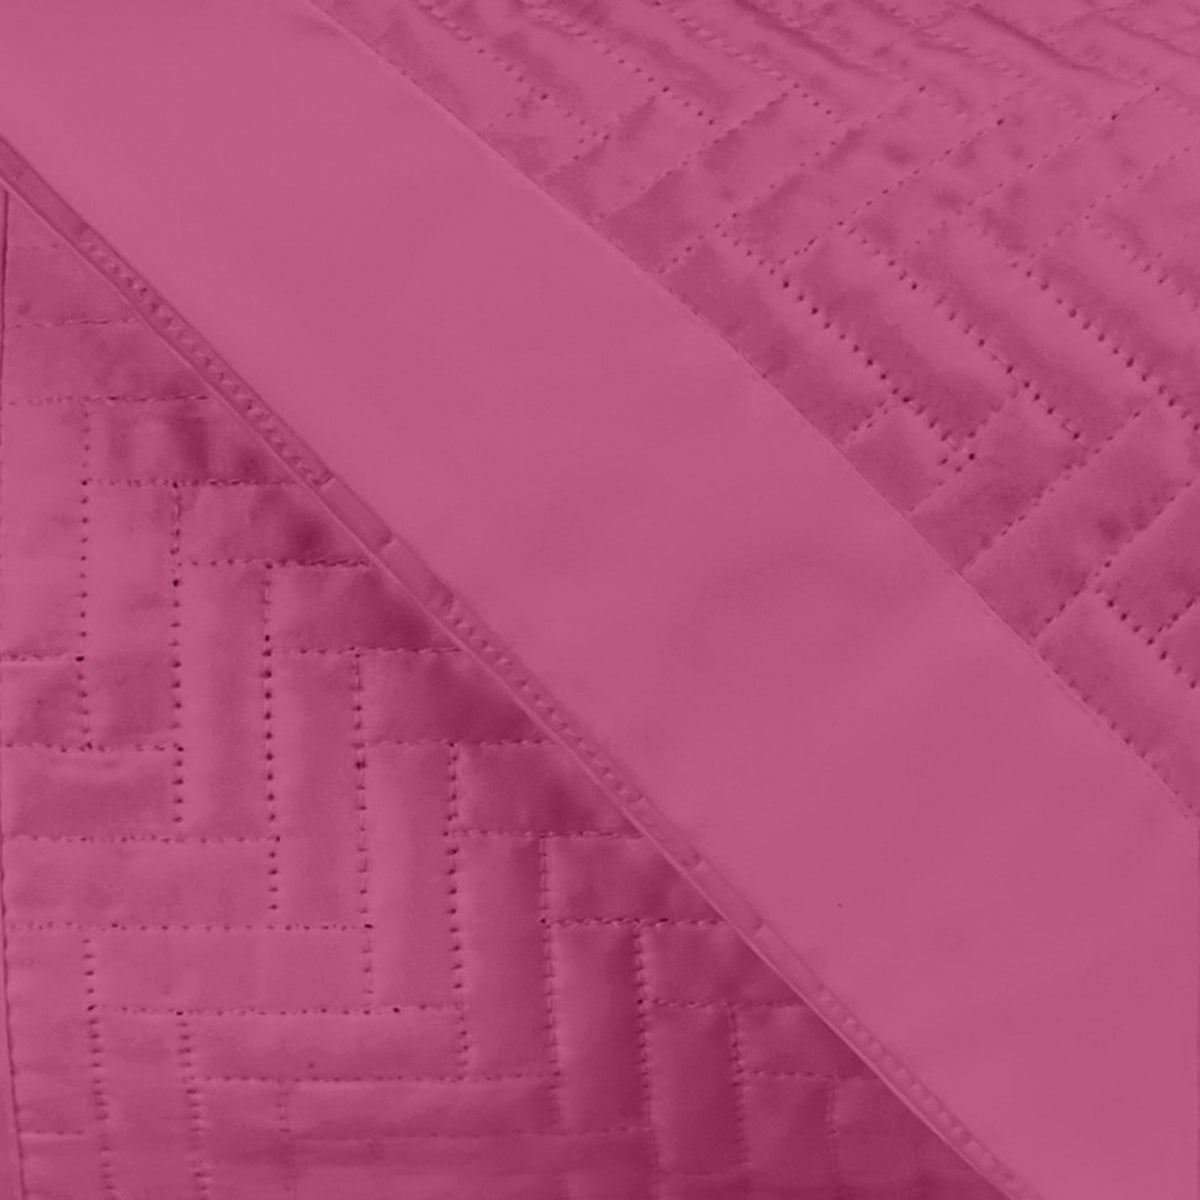 Swatch Sample of Home Treasures Baxter Royal Sateen Quilted Bedding in Color Bright Pink